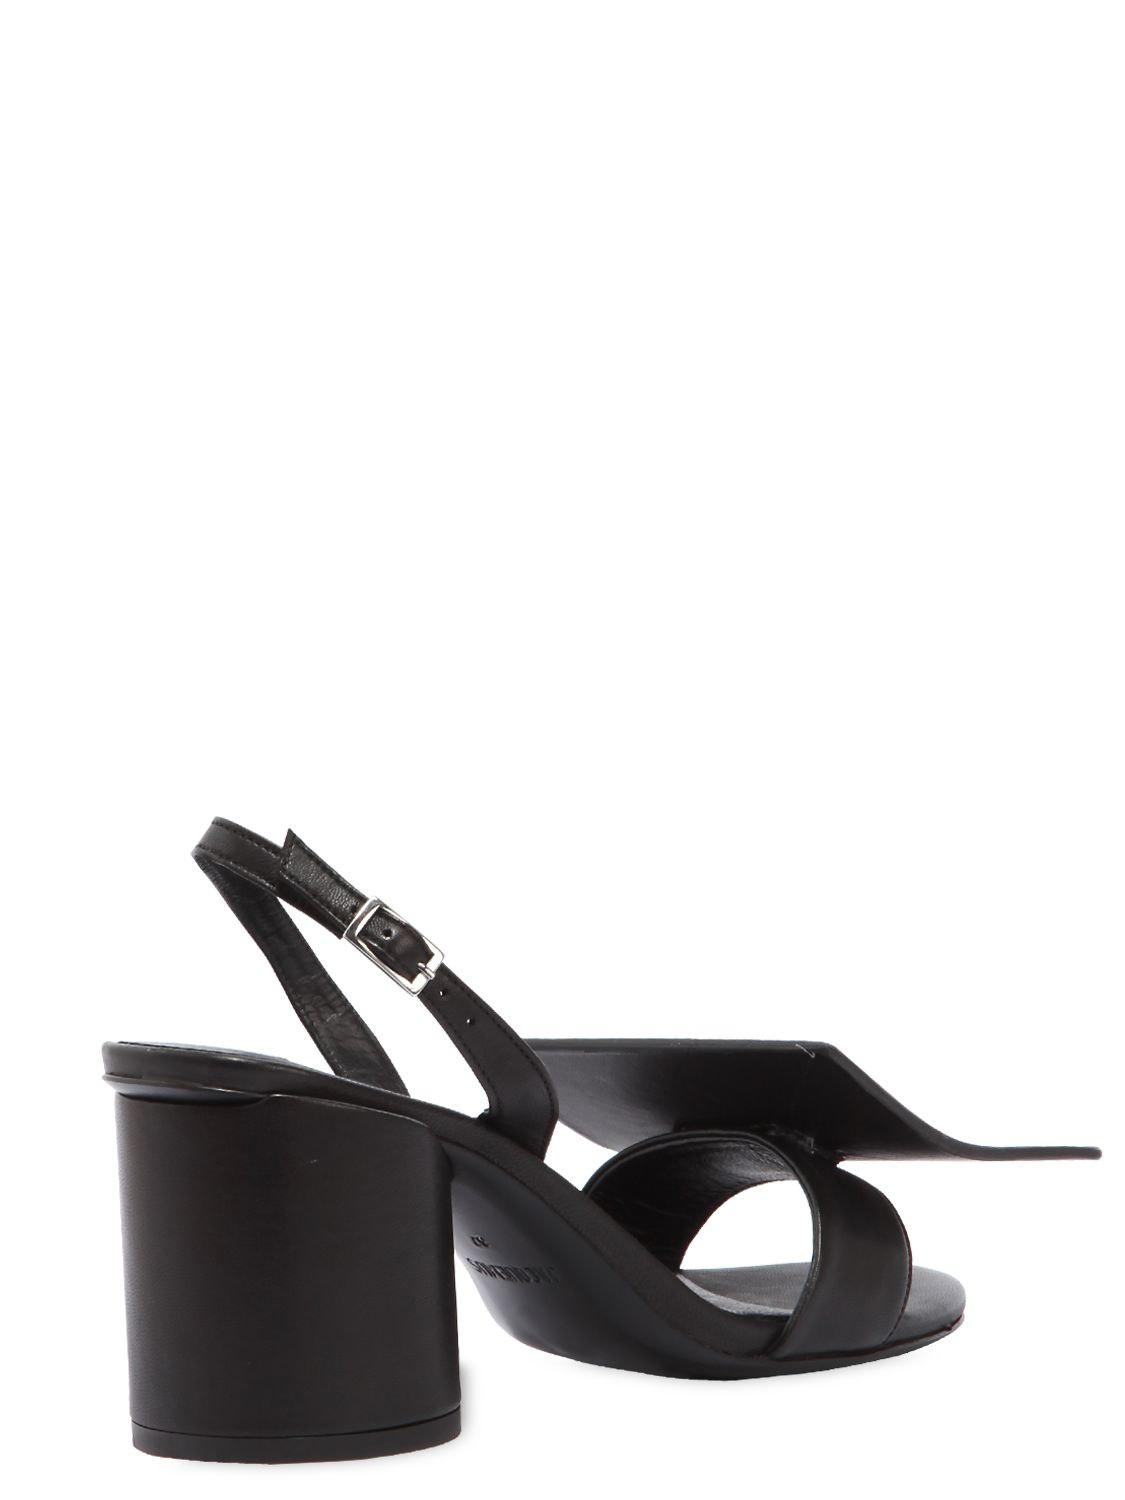 Jacquemus 90mm Square Circle Leather Sandals in Black | Lyst